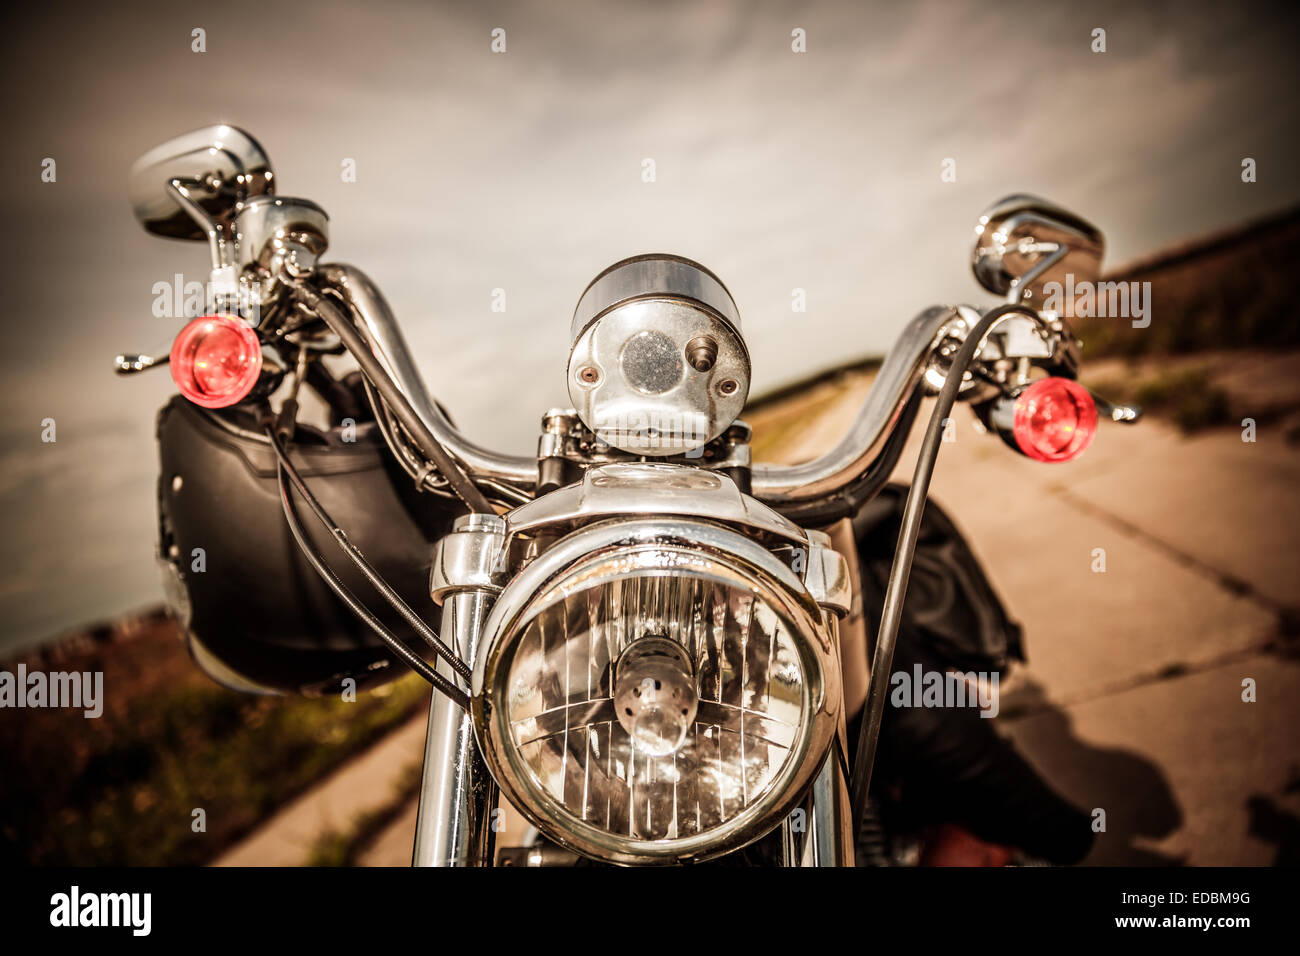 Motorcycle on the road with a helmet on the handlebars. Stock Photo